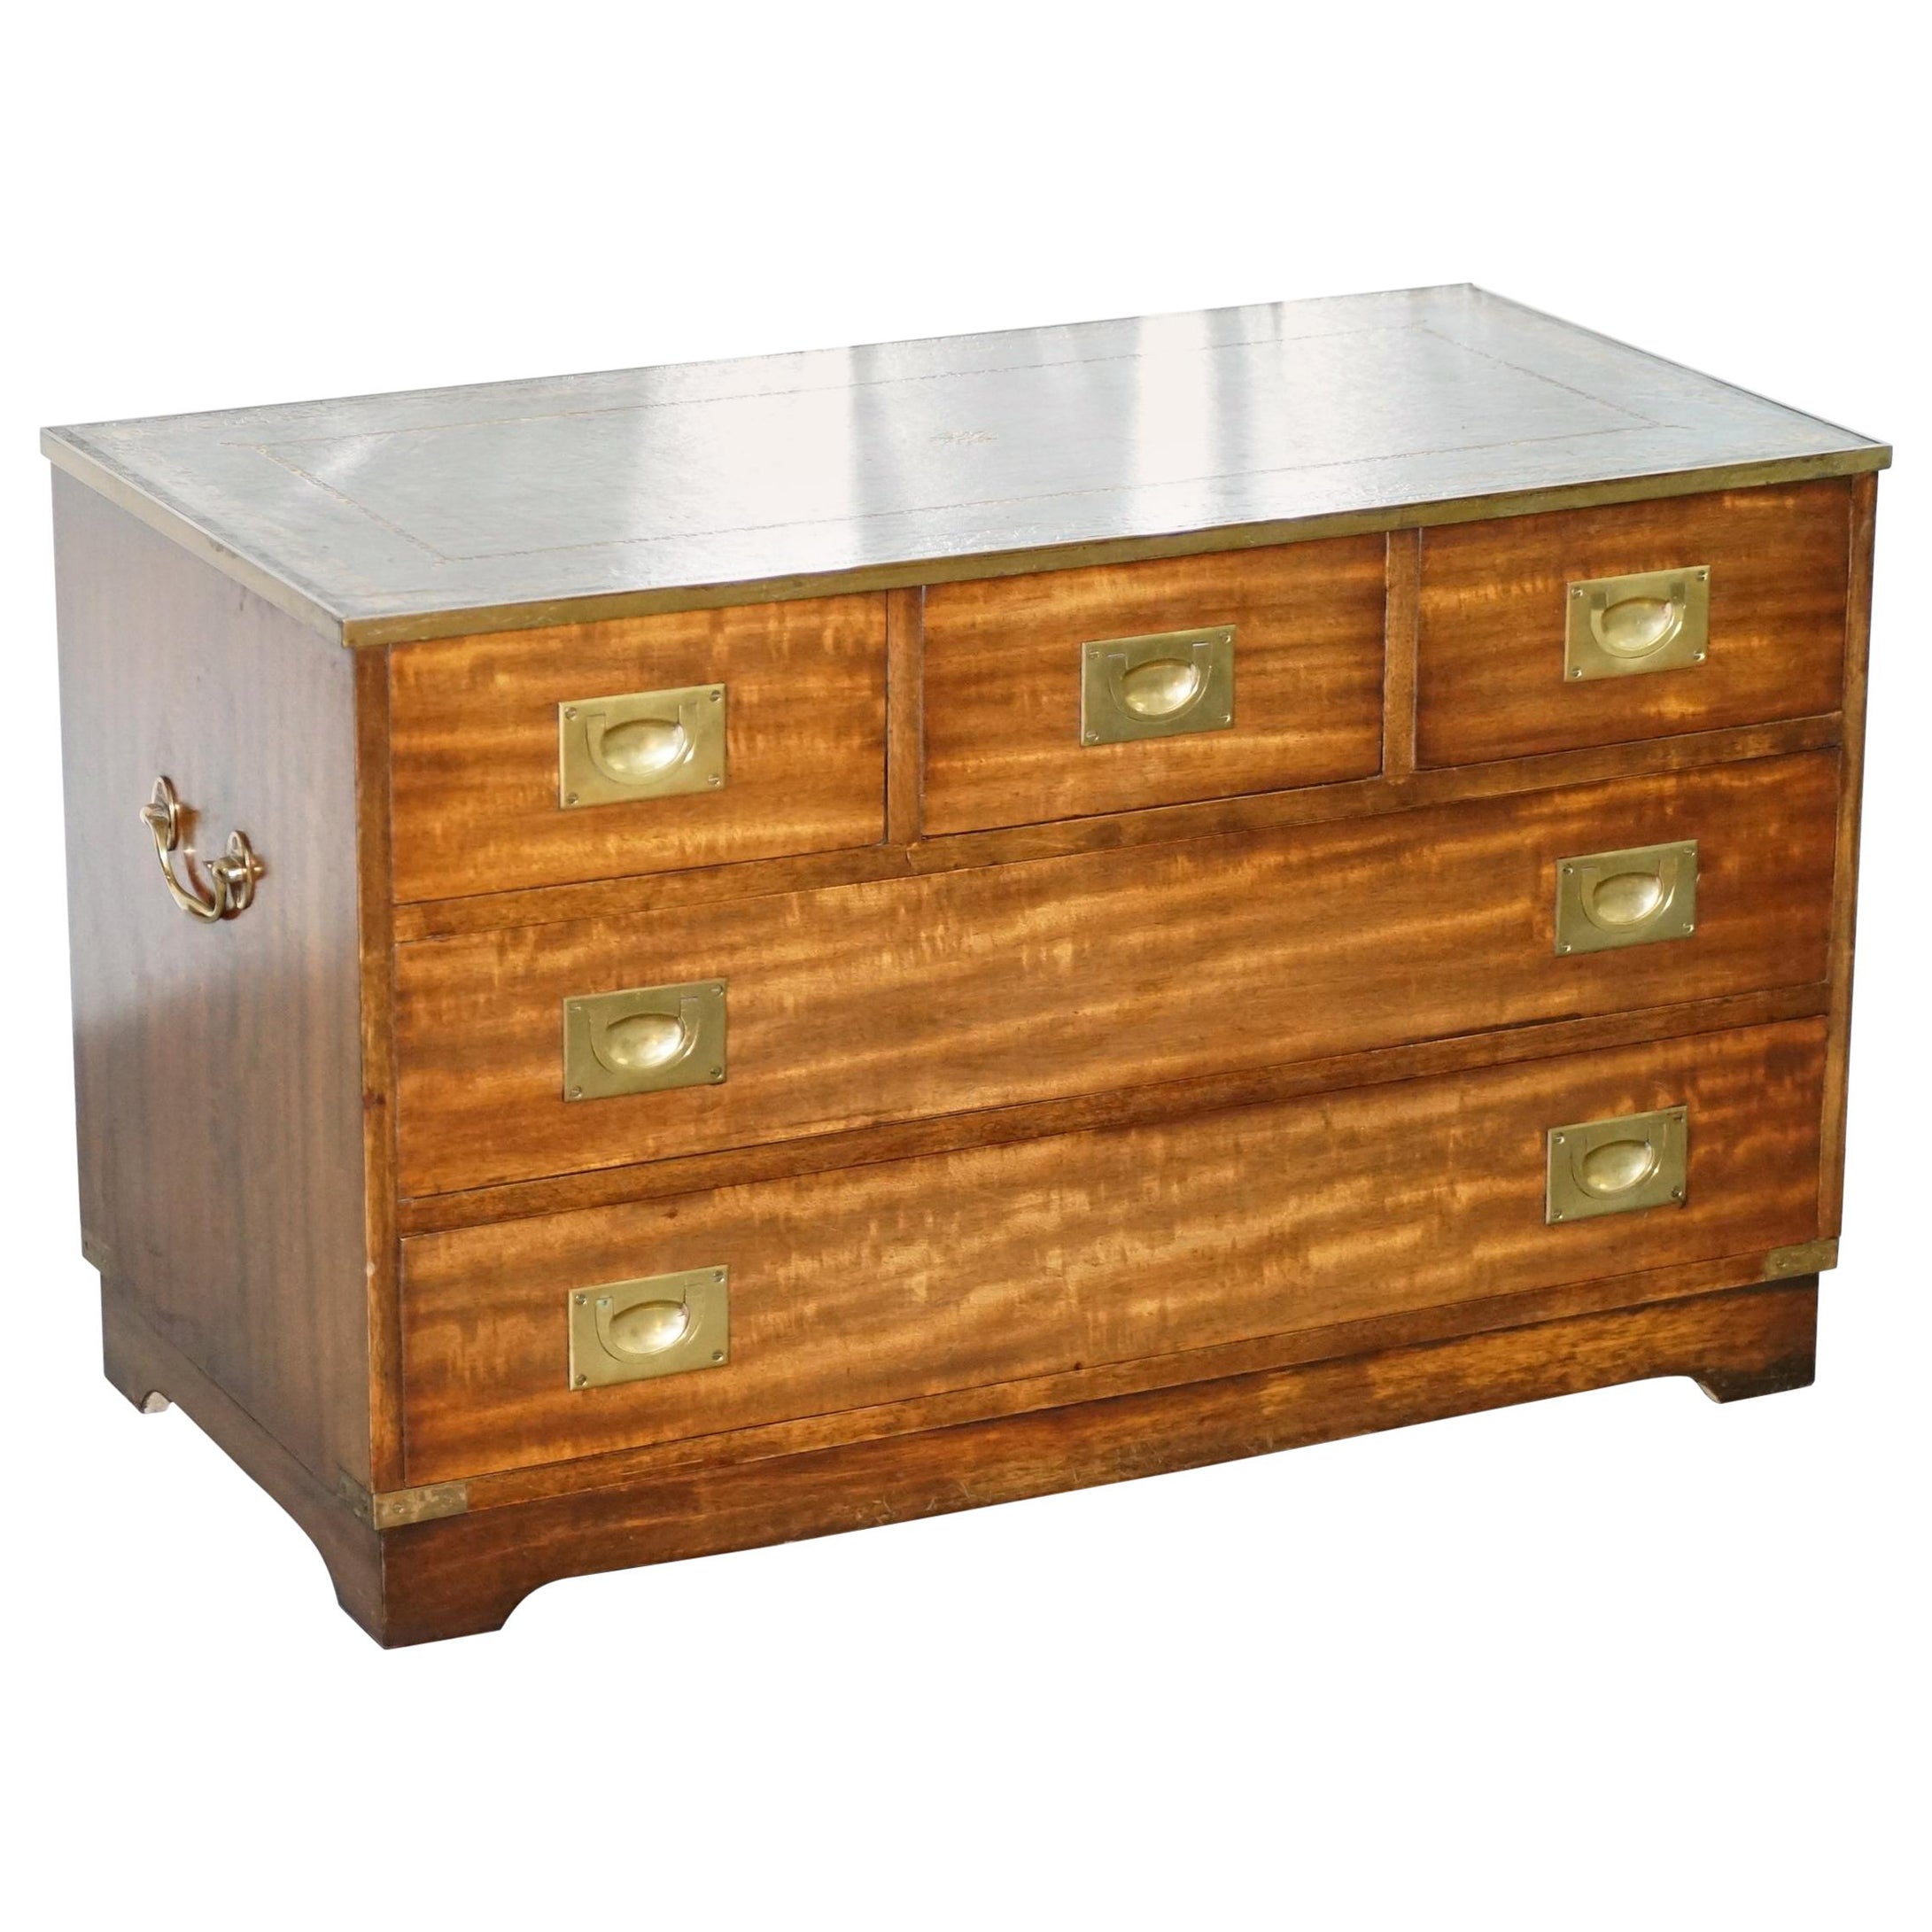 Bevan Funnell Reprodux Campaign Chest of Drawers Leather Top TV Stand